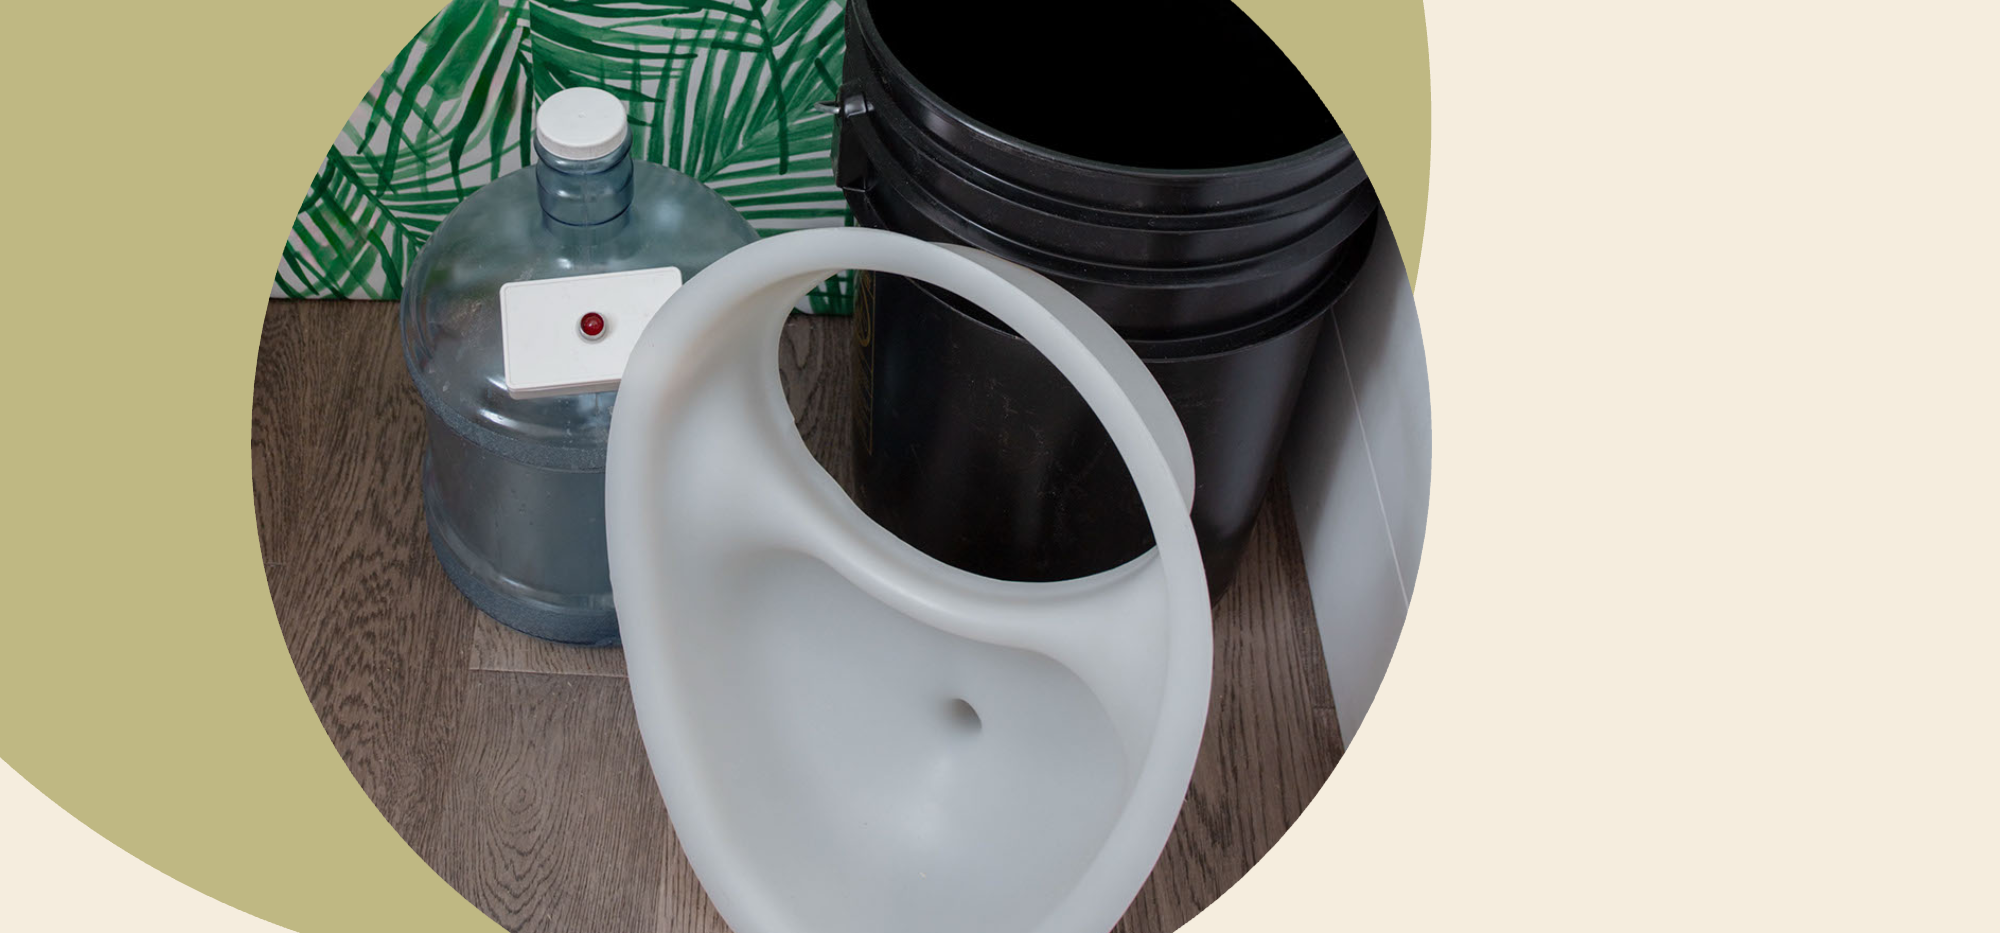 5 Mistakes to avoid when building your DIY composting toilet